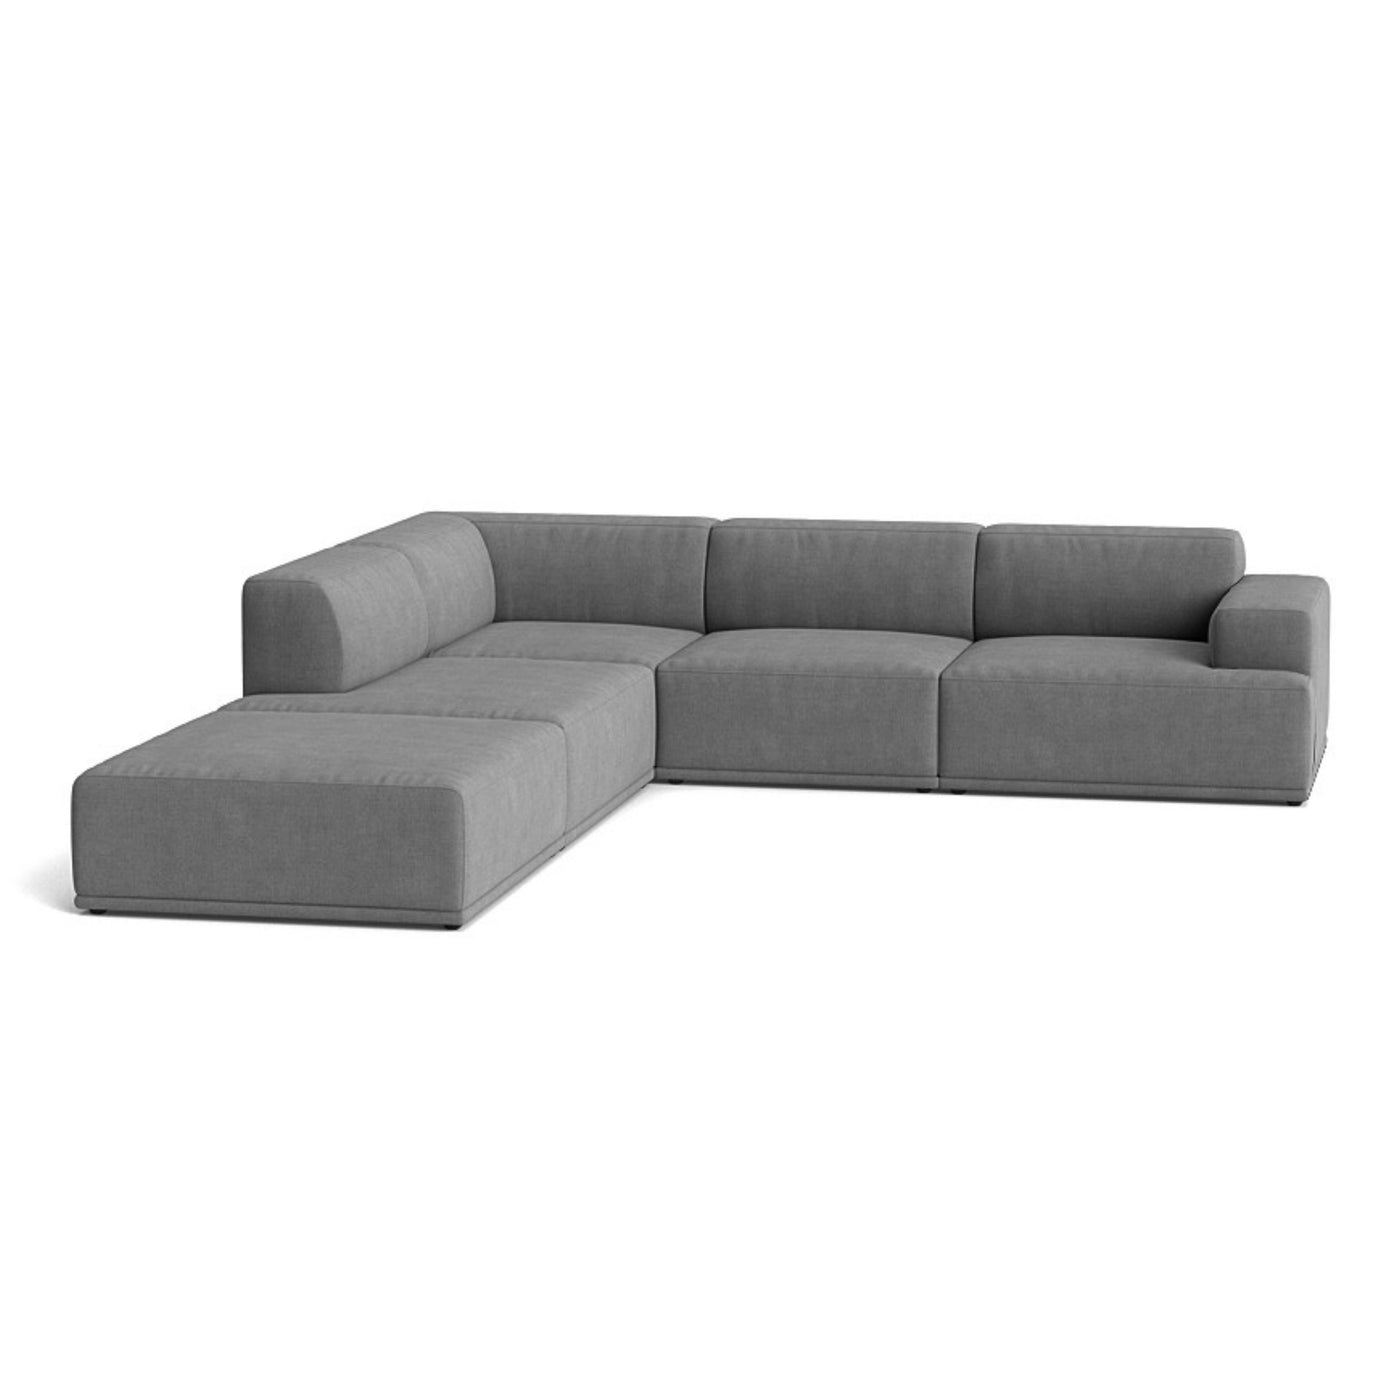 Muuto Connect Soft Modular Corner Sofa, configuration 1. Made-to-order from someday designs. #colour_fiord-171